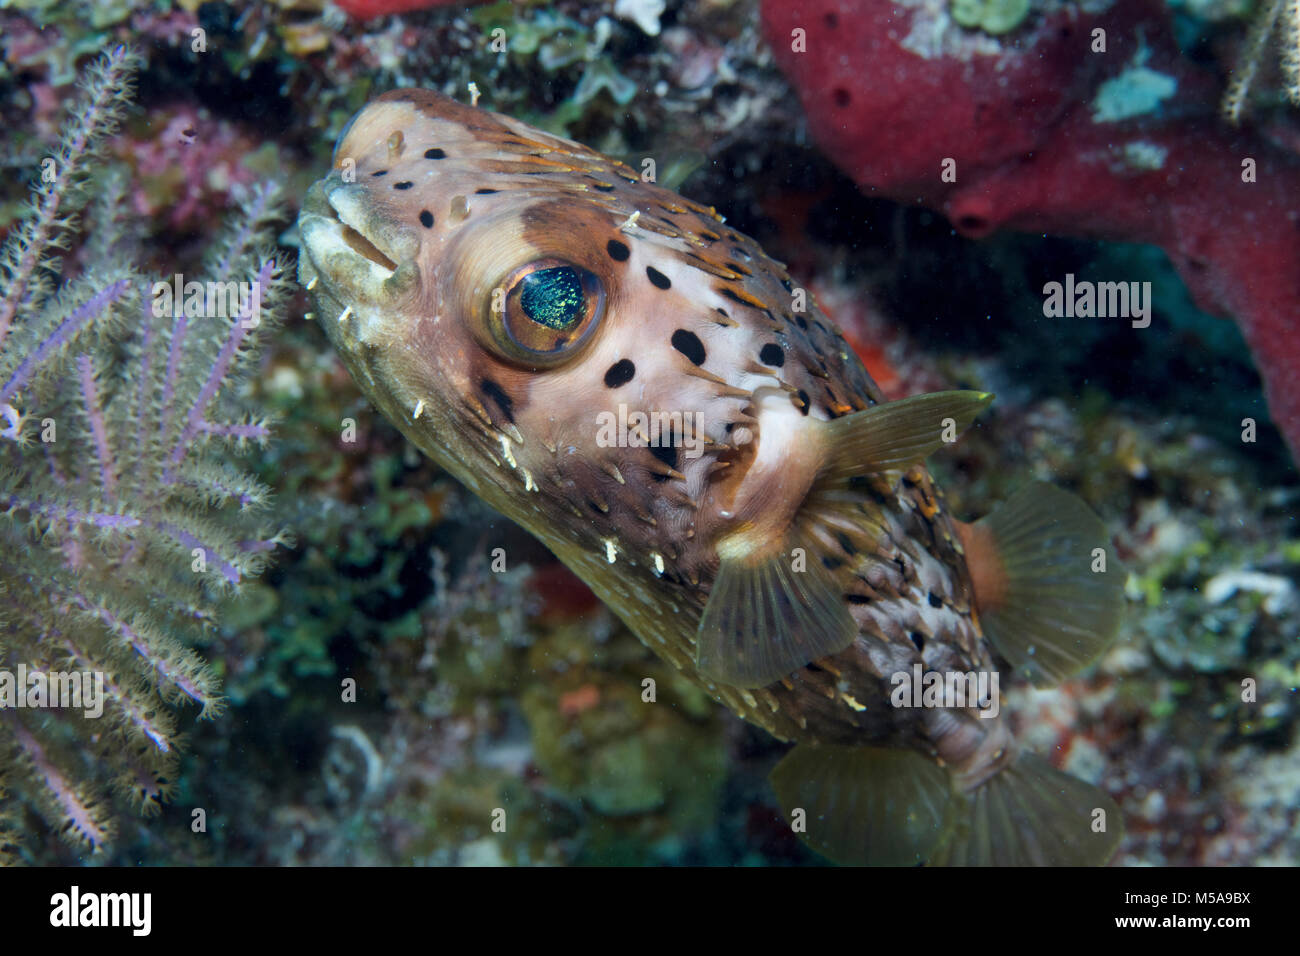 Opaline eyes of a Longspined porcupine fish, a balloon. Stock Photo